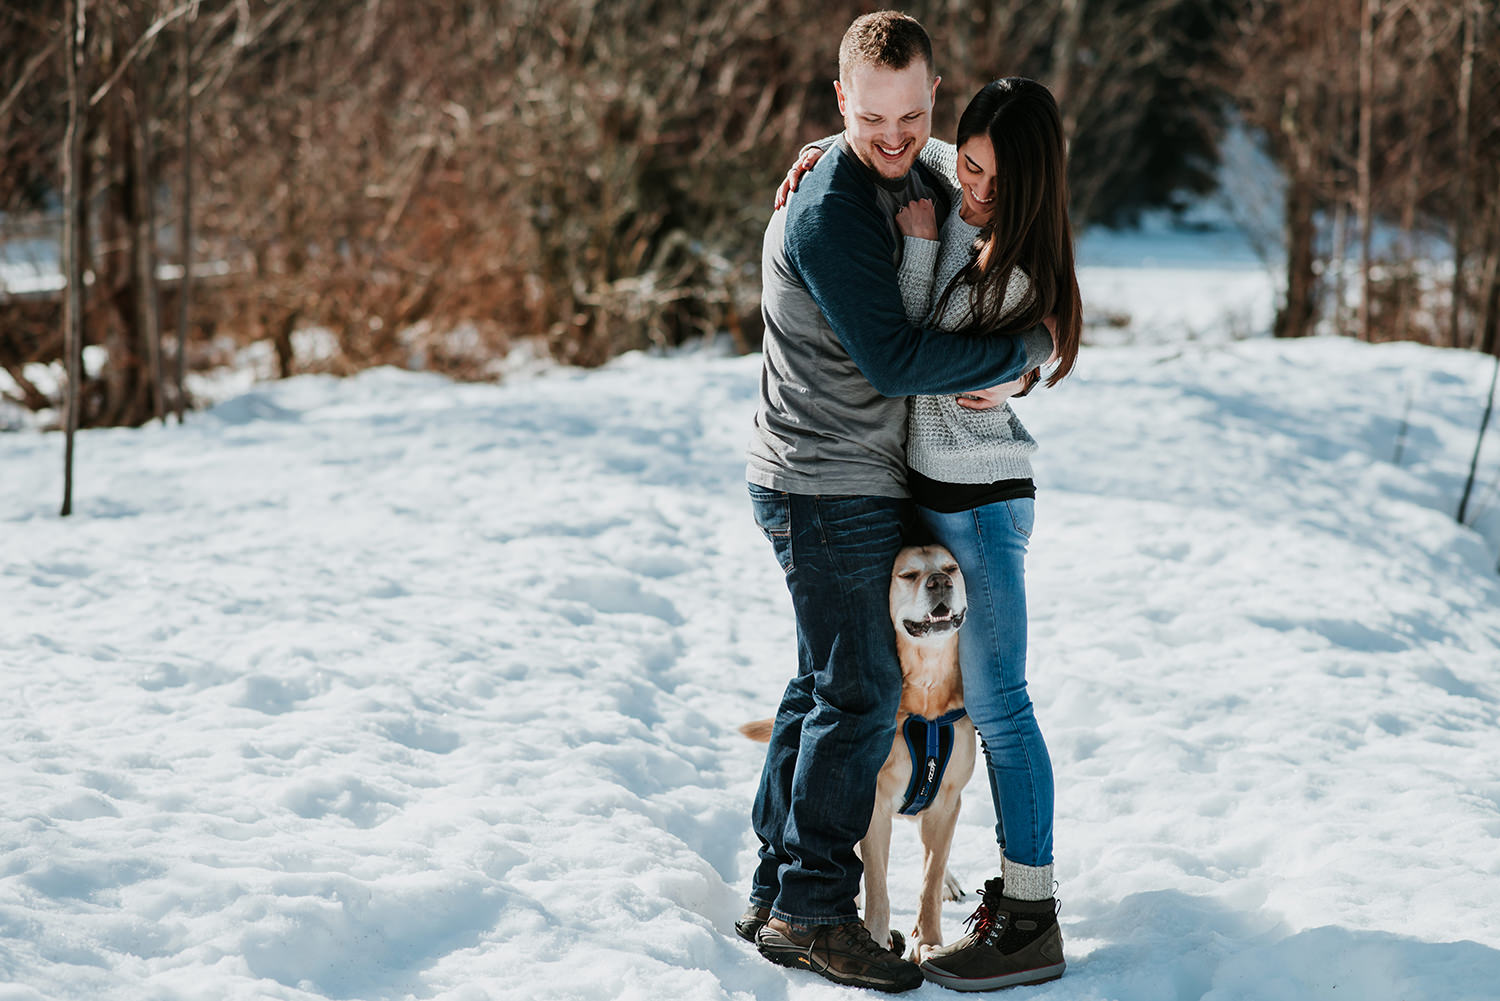 Newly engaged proposal photography in Whistler BC